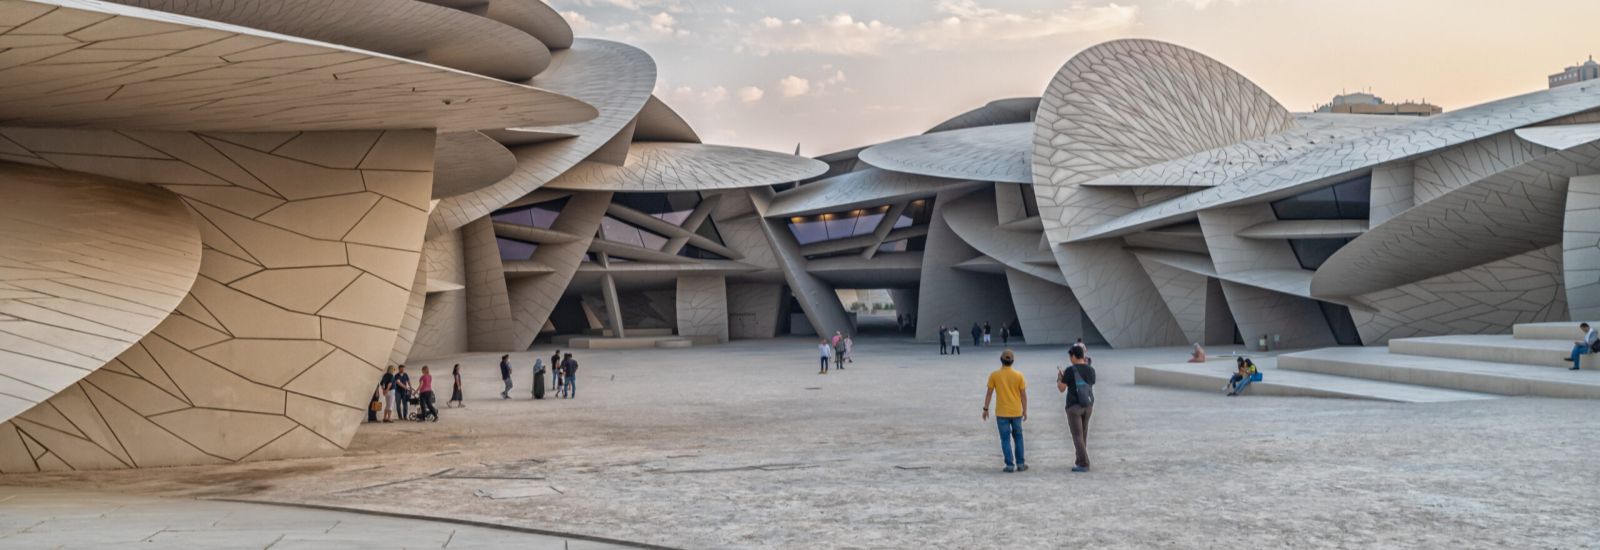 Exterior of the National Museum of Qatar - Modern, Disk Shaped Building